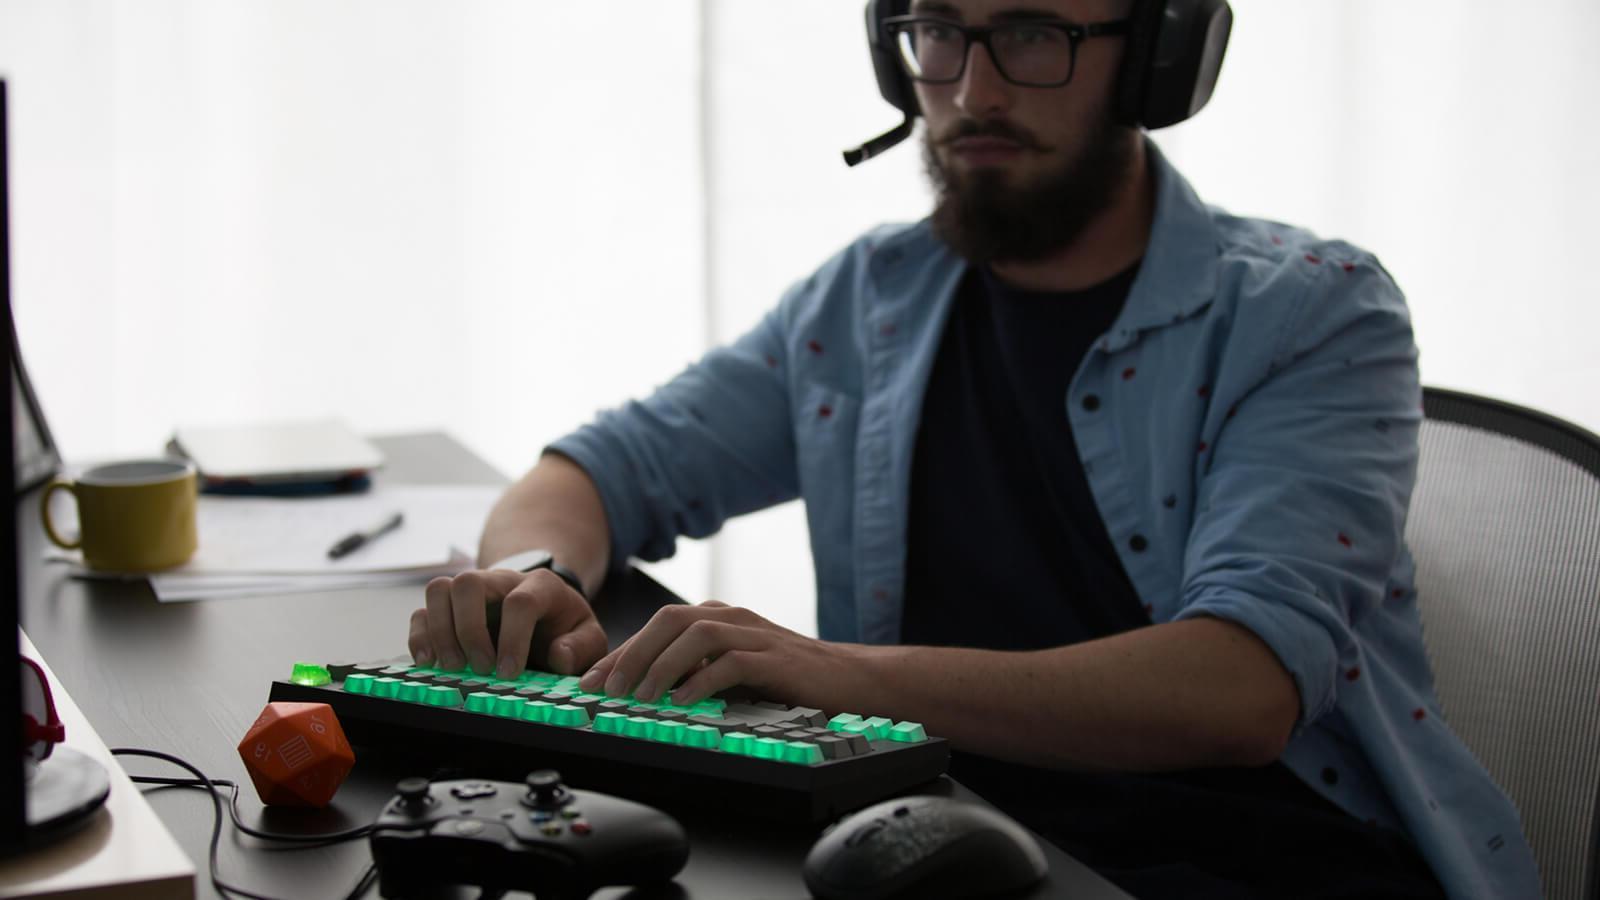 A man wearing a gaming headset sits at a desk with a gaming keyboard, an Xbox controller, and a Dungeons & Dragons die.